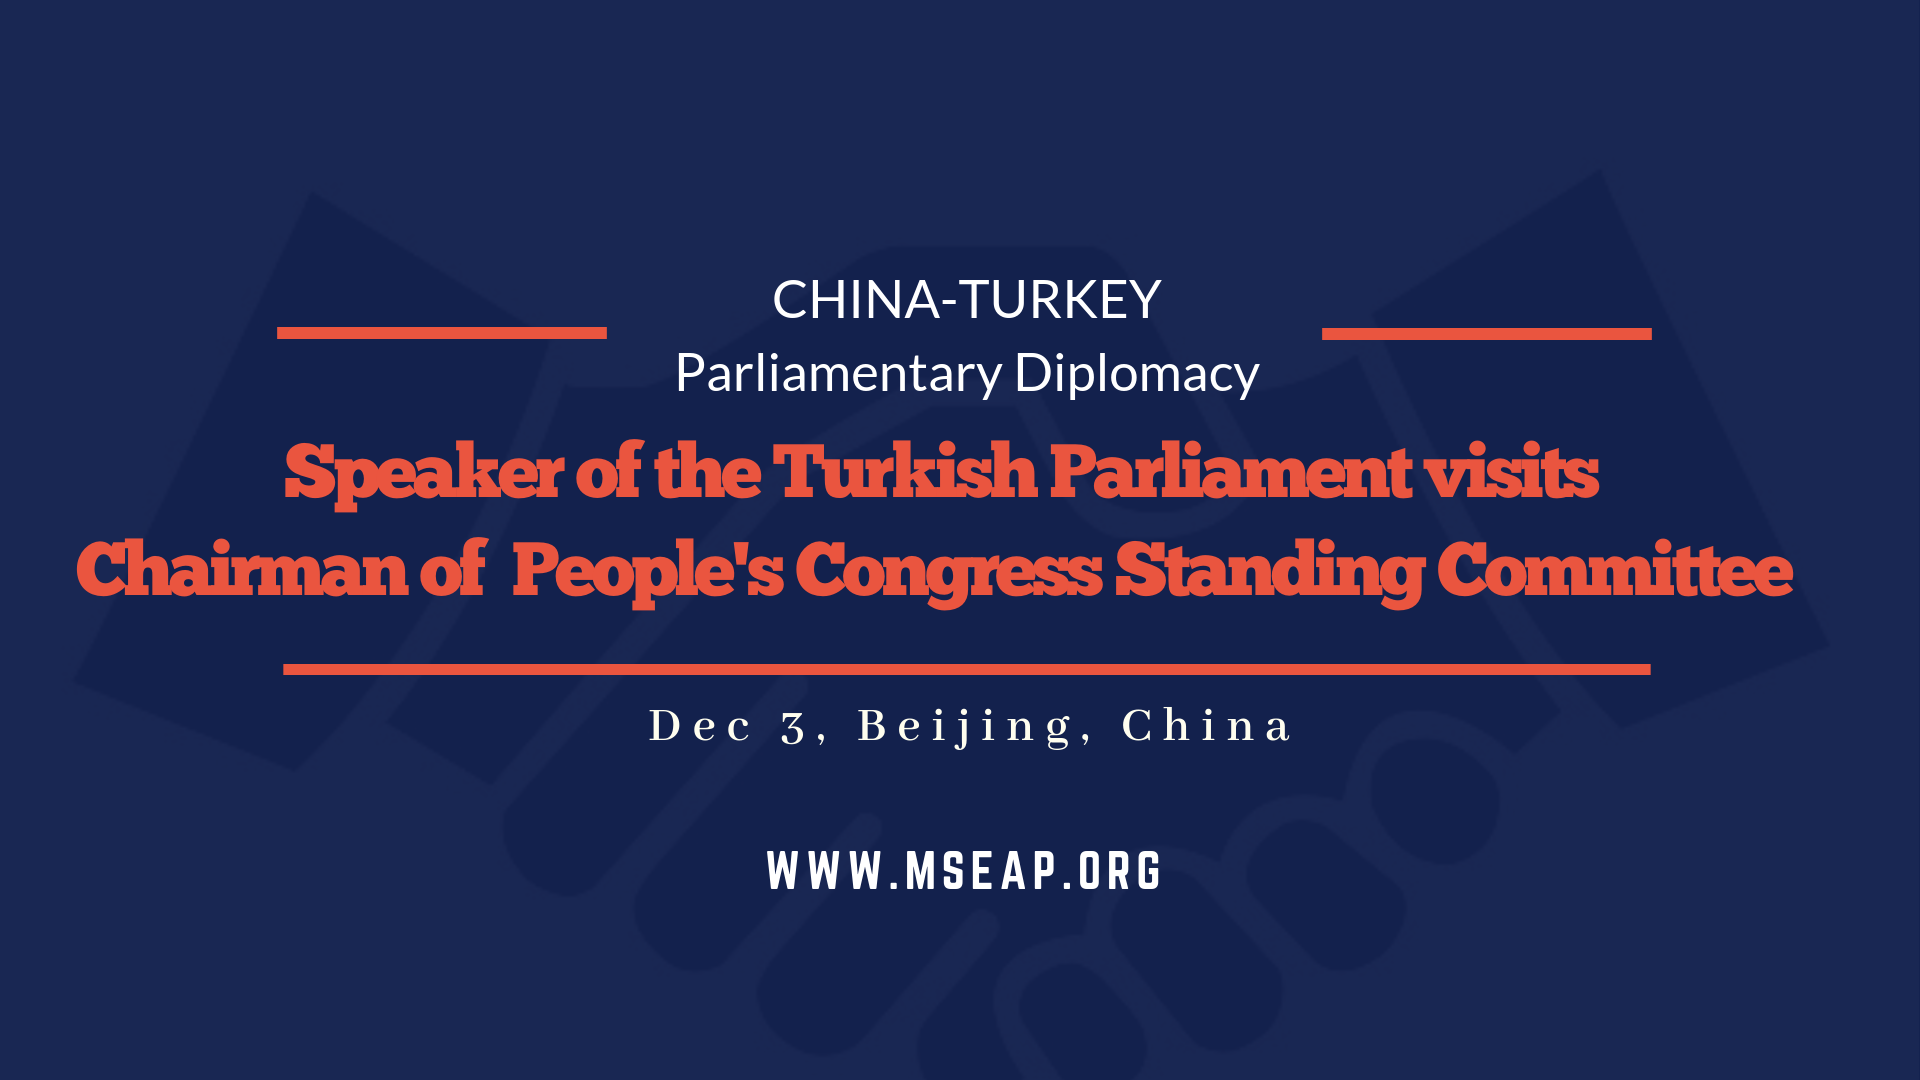 Speaker of the Grand National Assembly of Turkey visits the chairman of China’s National People’s Congress Standing Committee